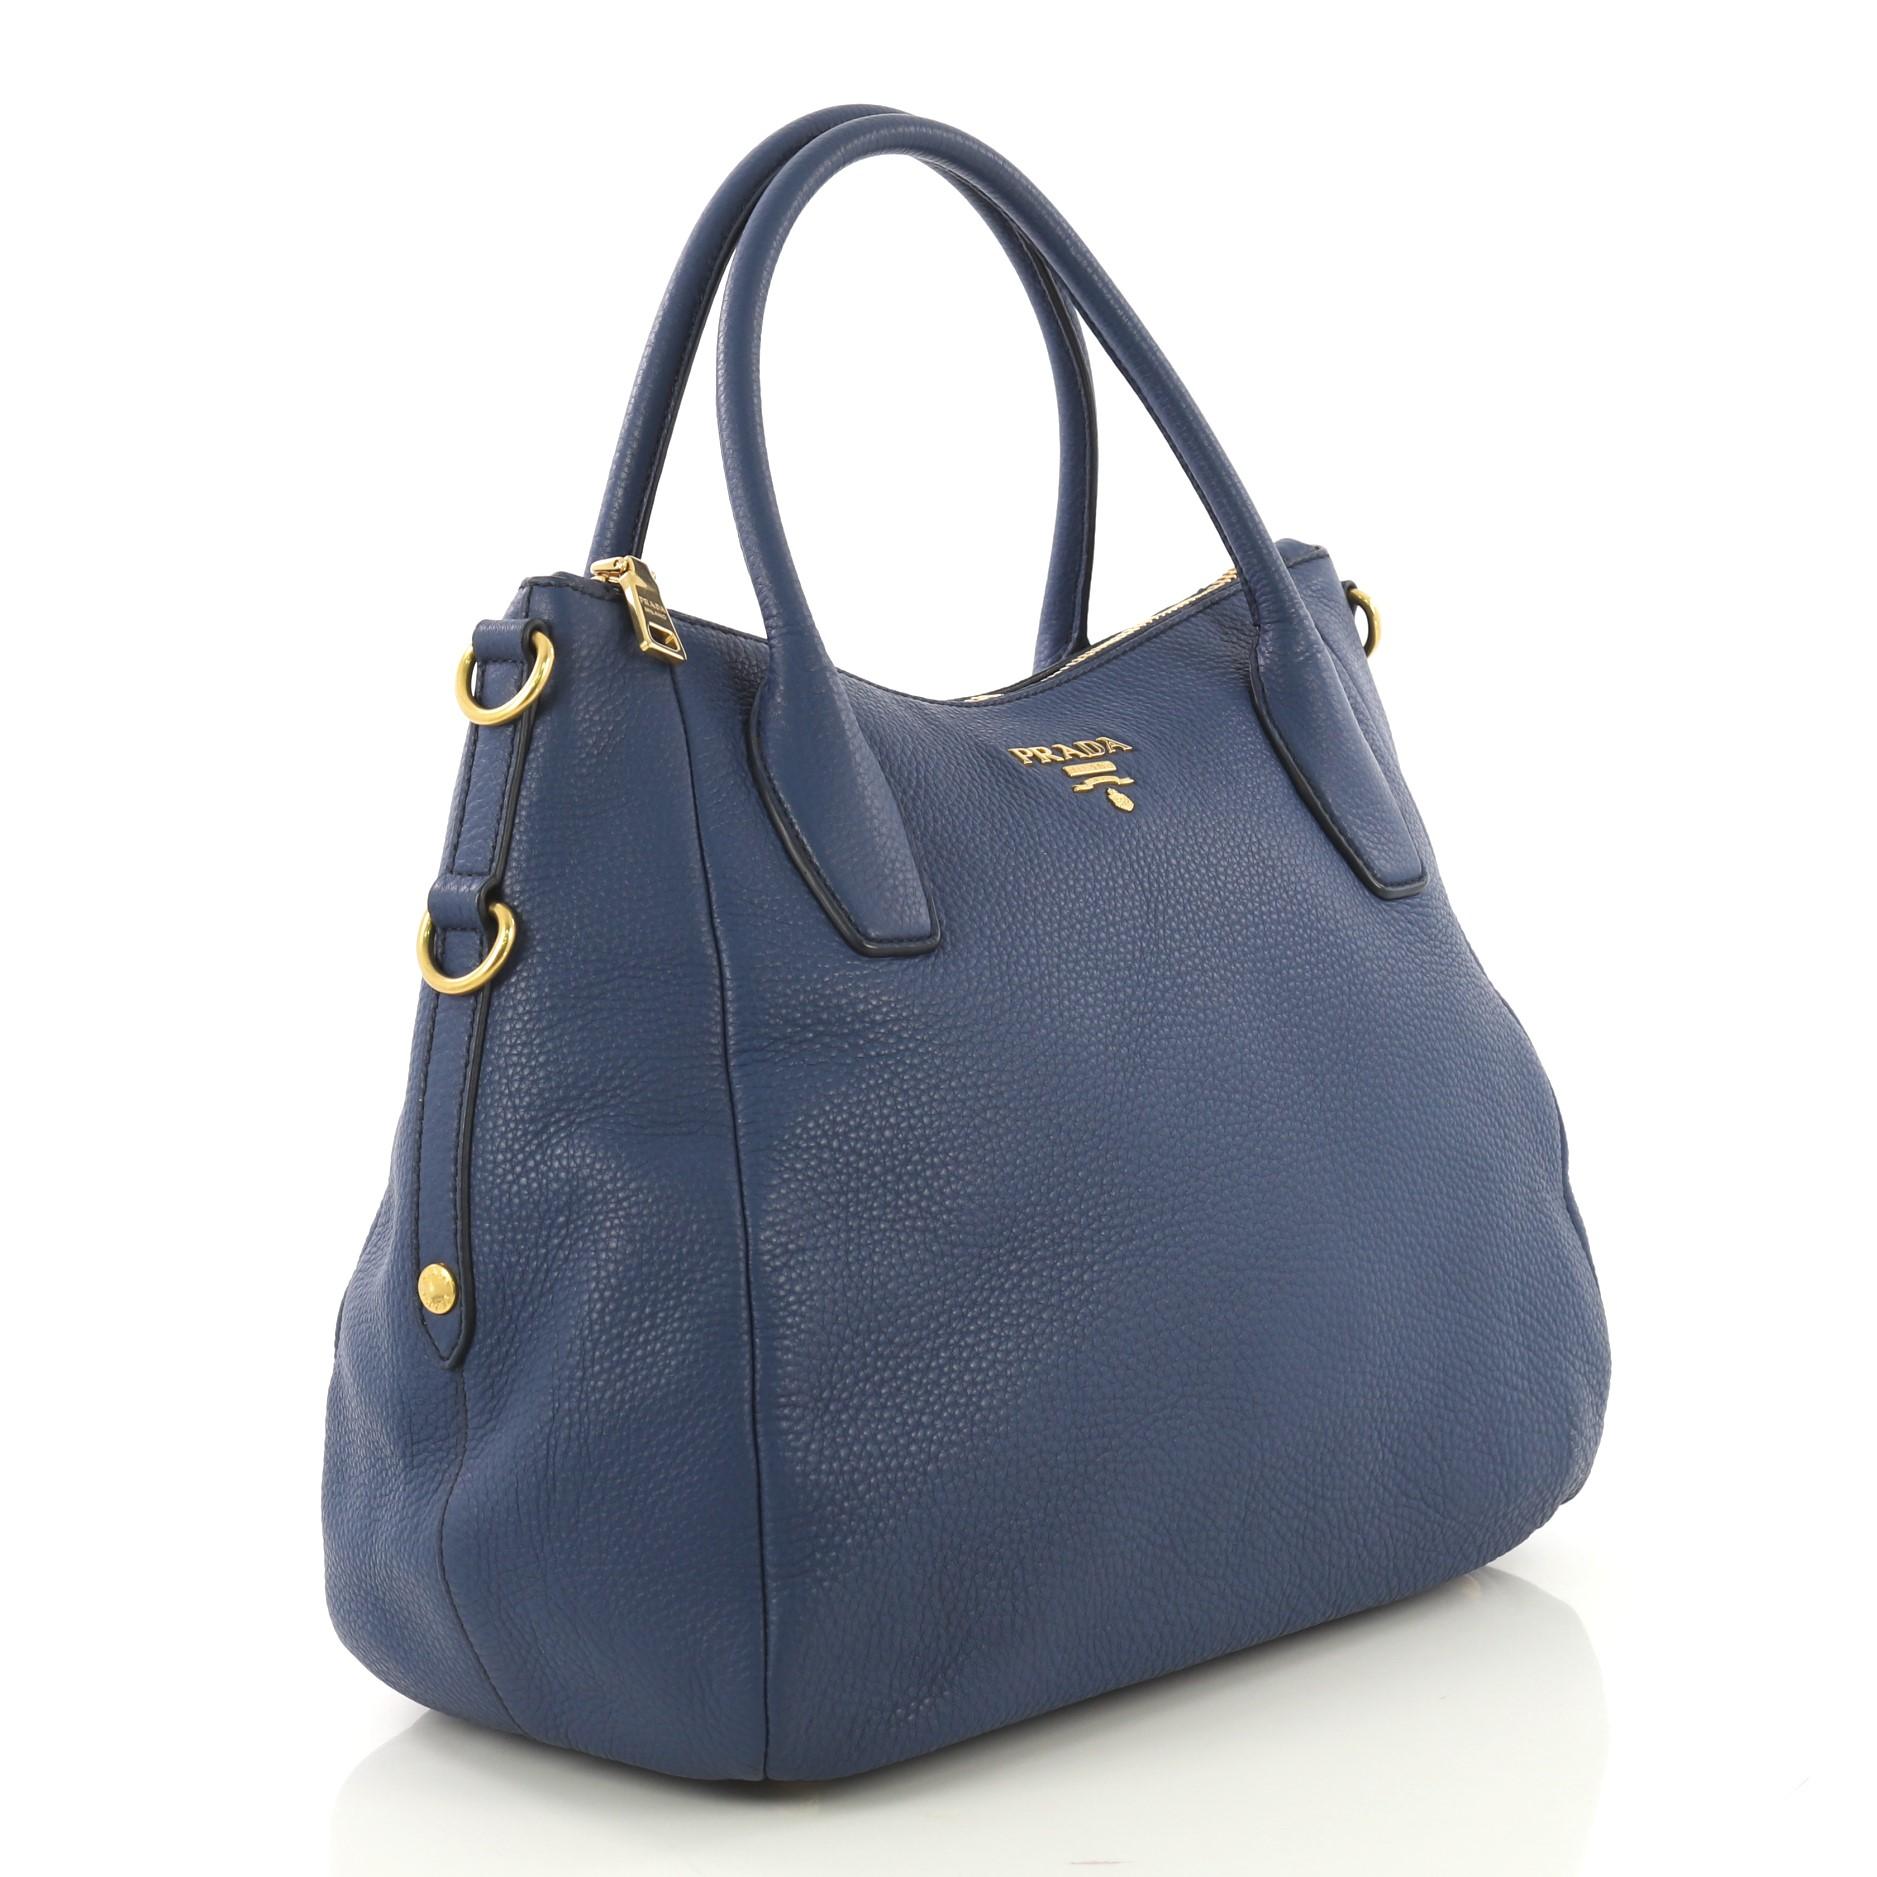 This Prada Sacca 2 Manici Convertible Tote Vitello Daino Medium, crafted from blue vitello daino leather, features dual rolled top handles, raised Prada Milano logo at its center, protective base studs, and gold-tone hardware. Its zip closure opens